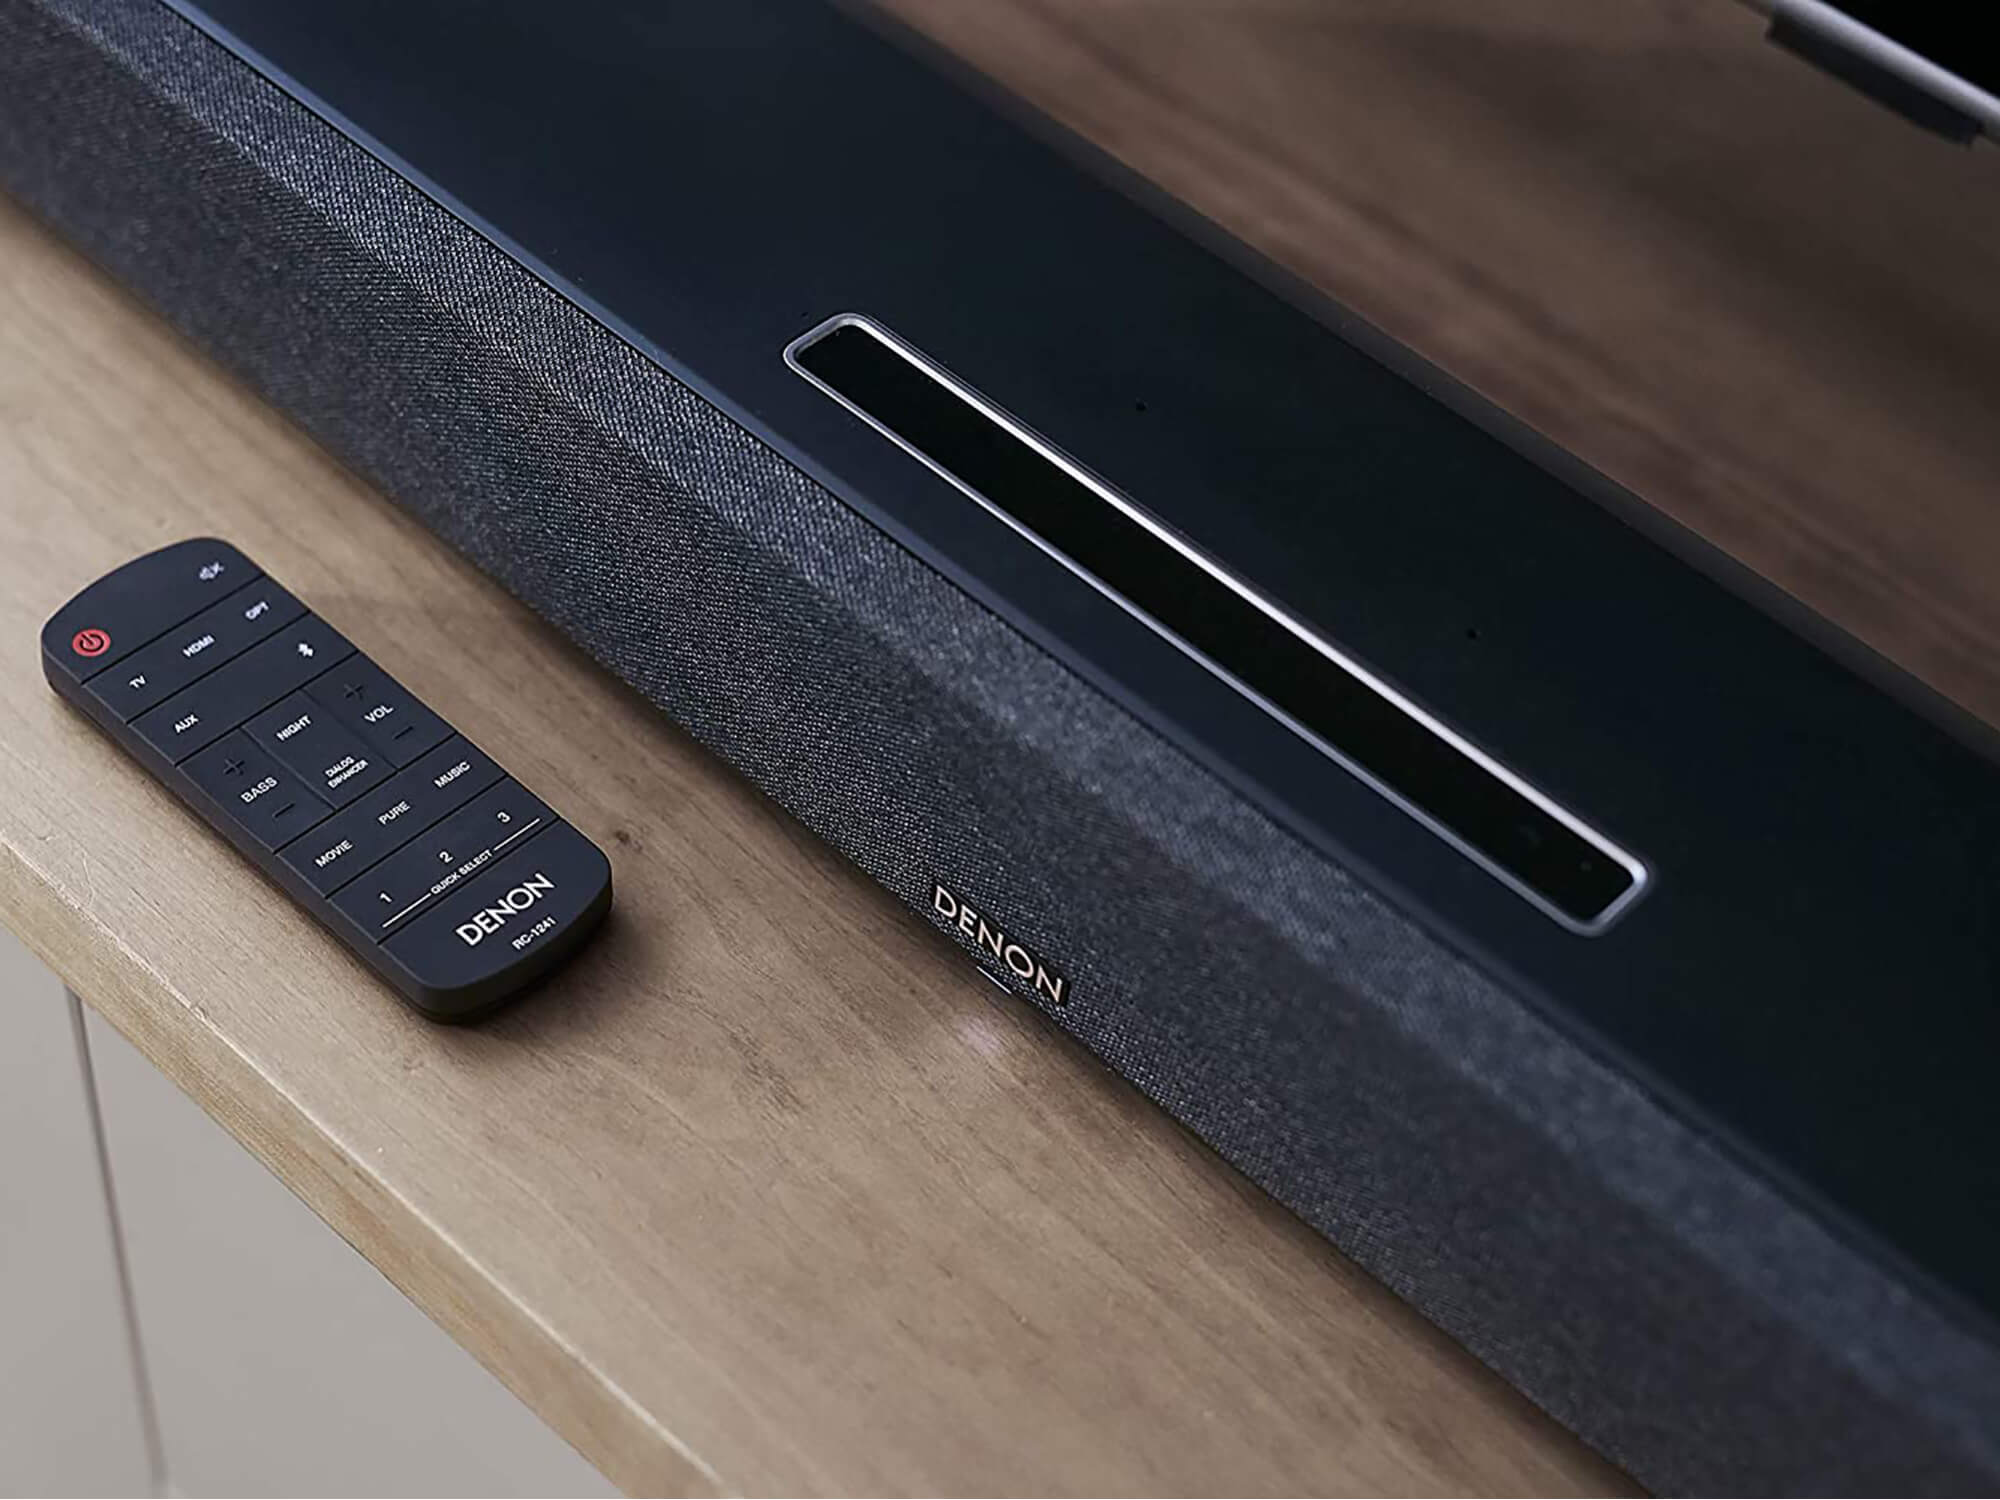 Denon Home Sound Bar 550 review: A semblance of a surround experience at an appealing price